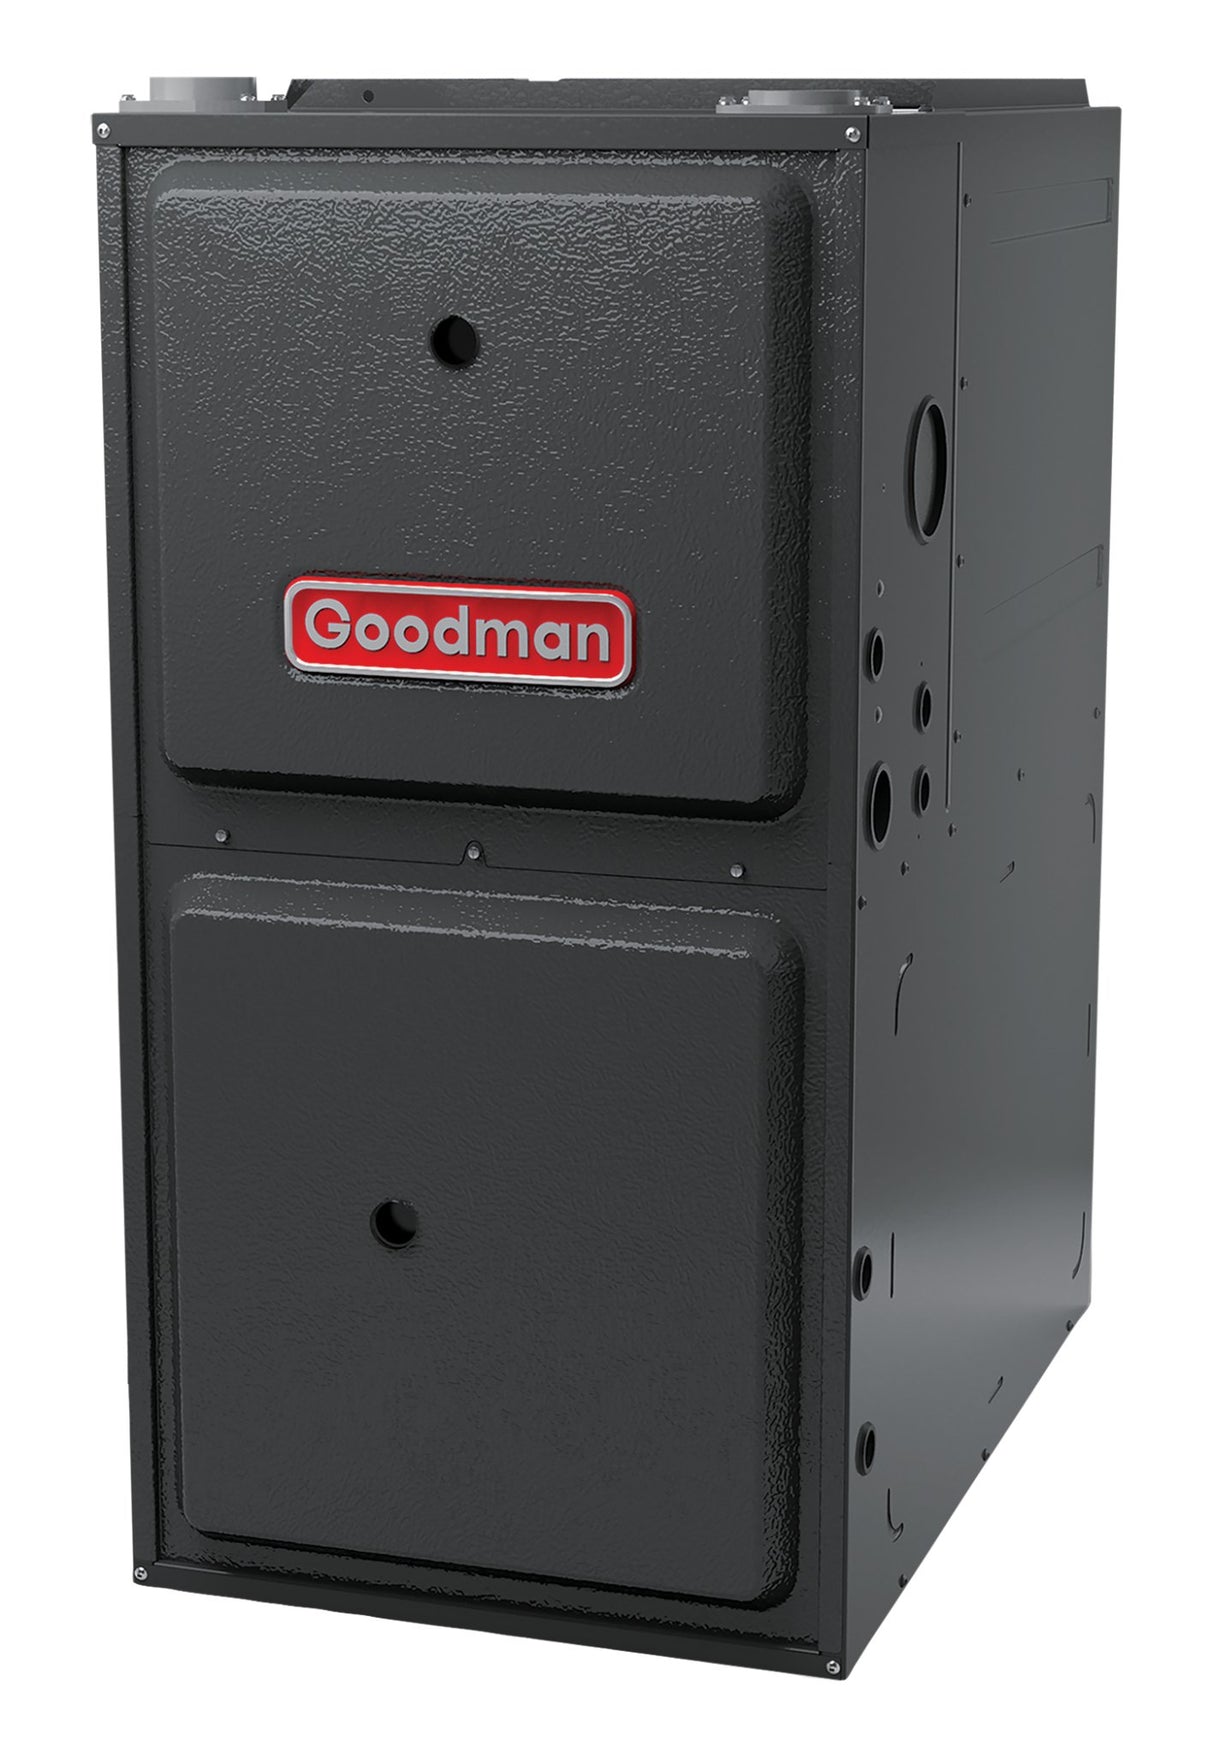 Goodman 80% afue gas furnace variable speed ecm two stage GMVC800603BX - AC units for less